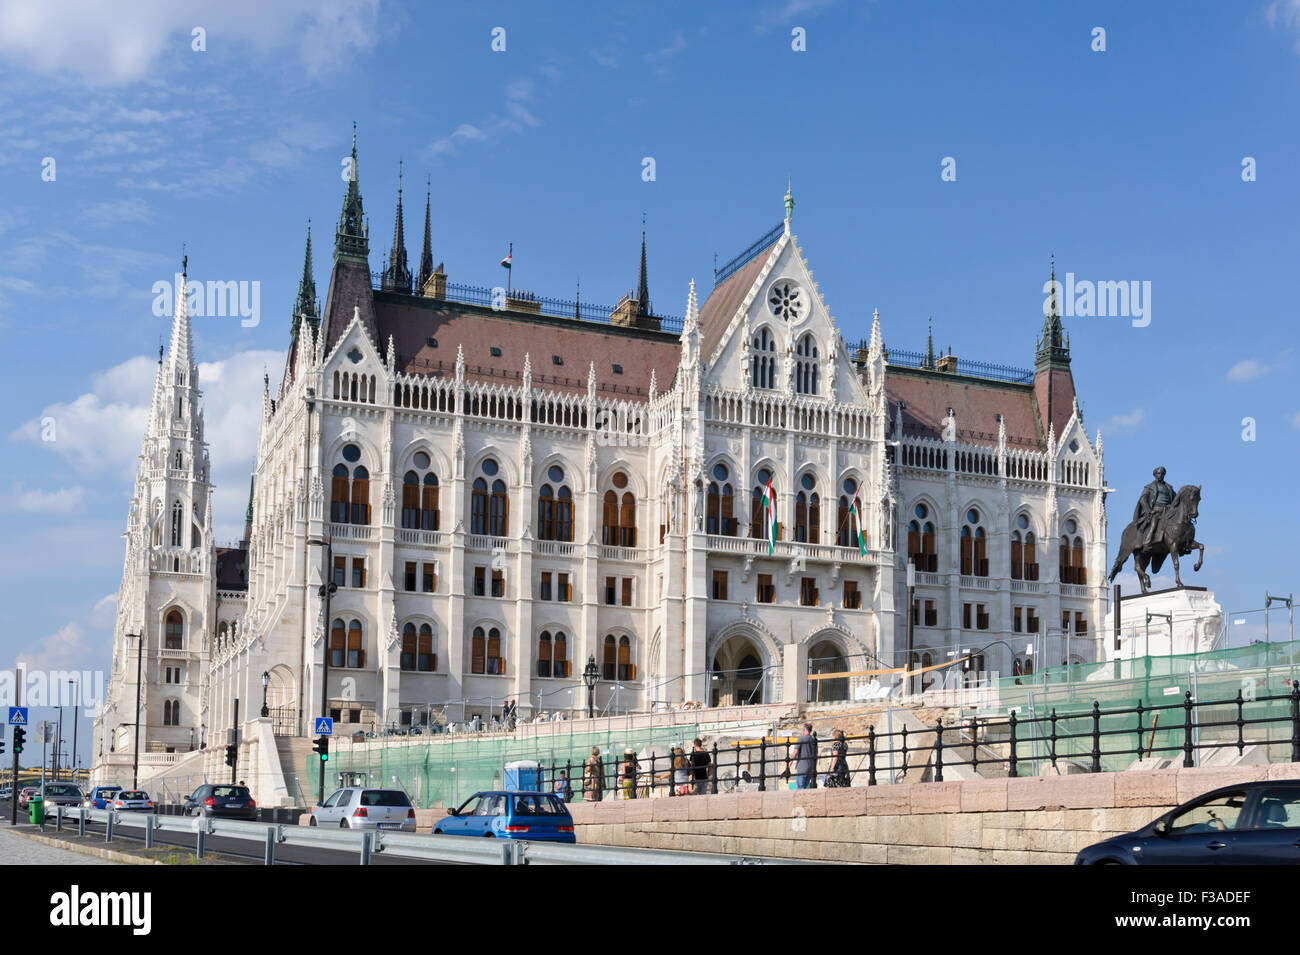 The Gothic style Hungarian Parliament building in Budapest, Hungary. Stock Photo